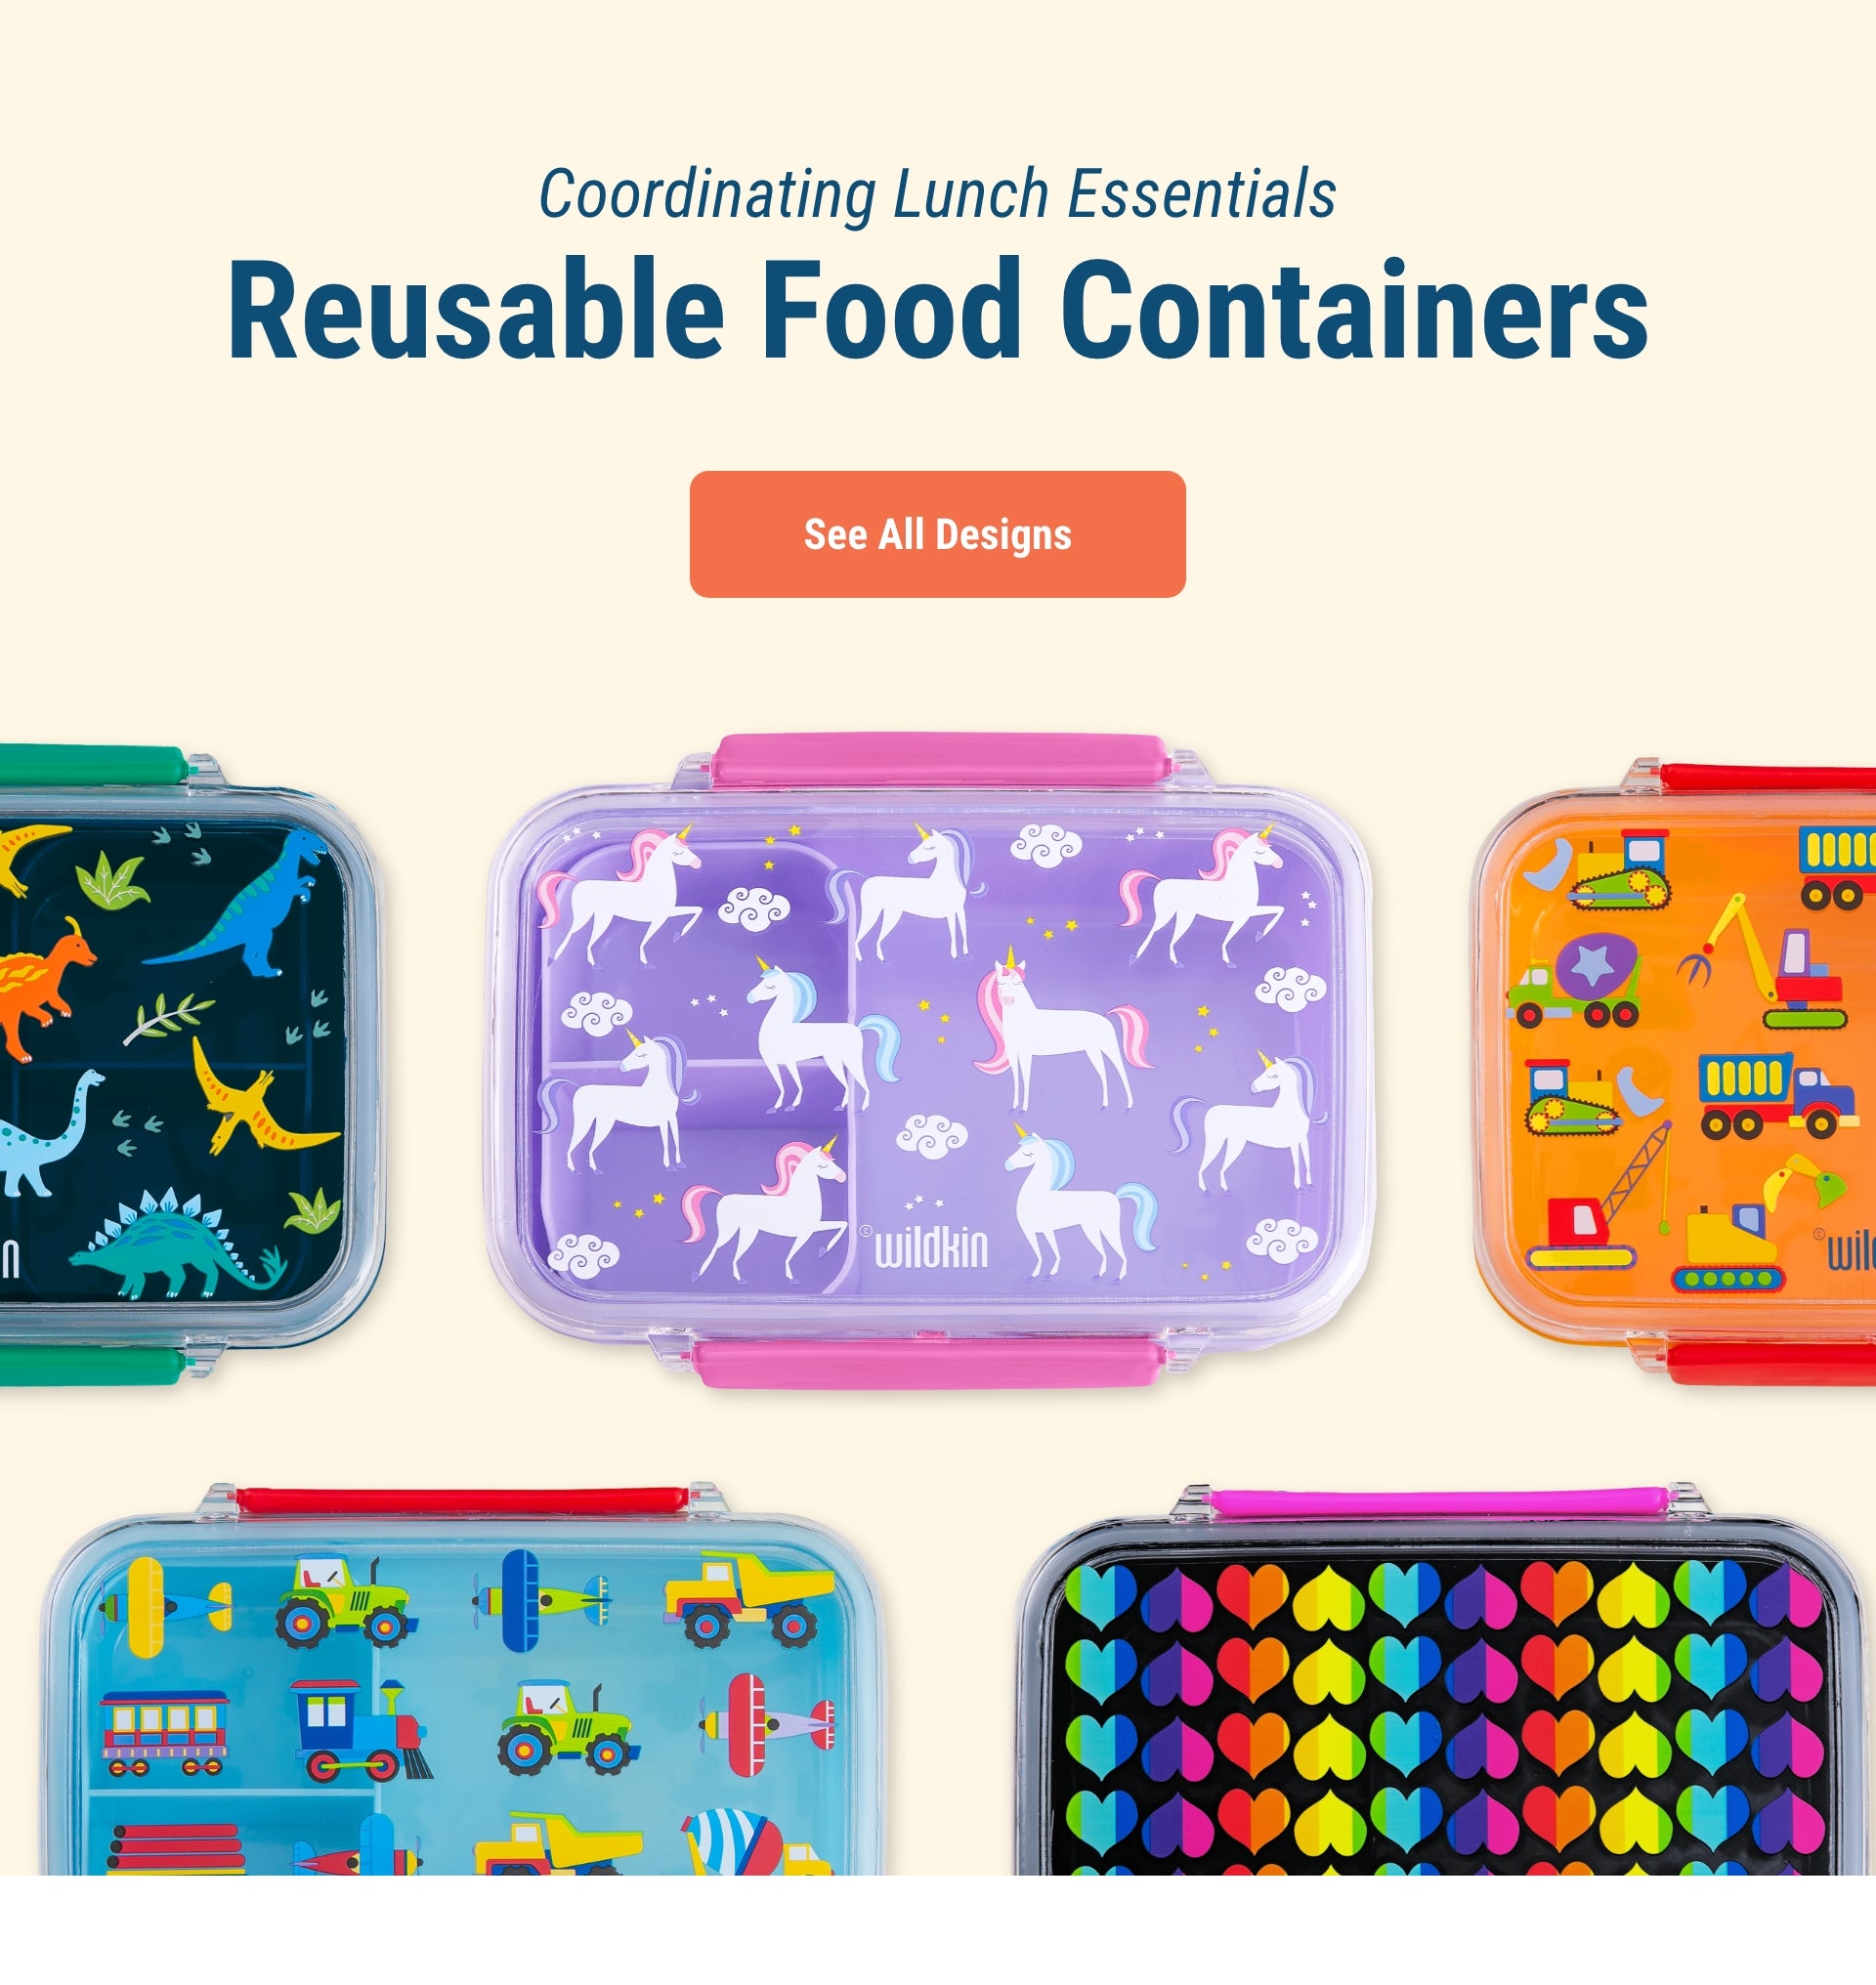 Coordinating Lunch Essentials. Reusable Food Containers. Link to See all Designs